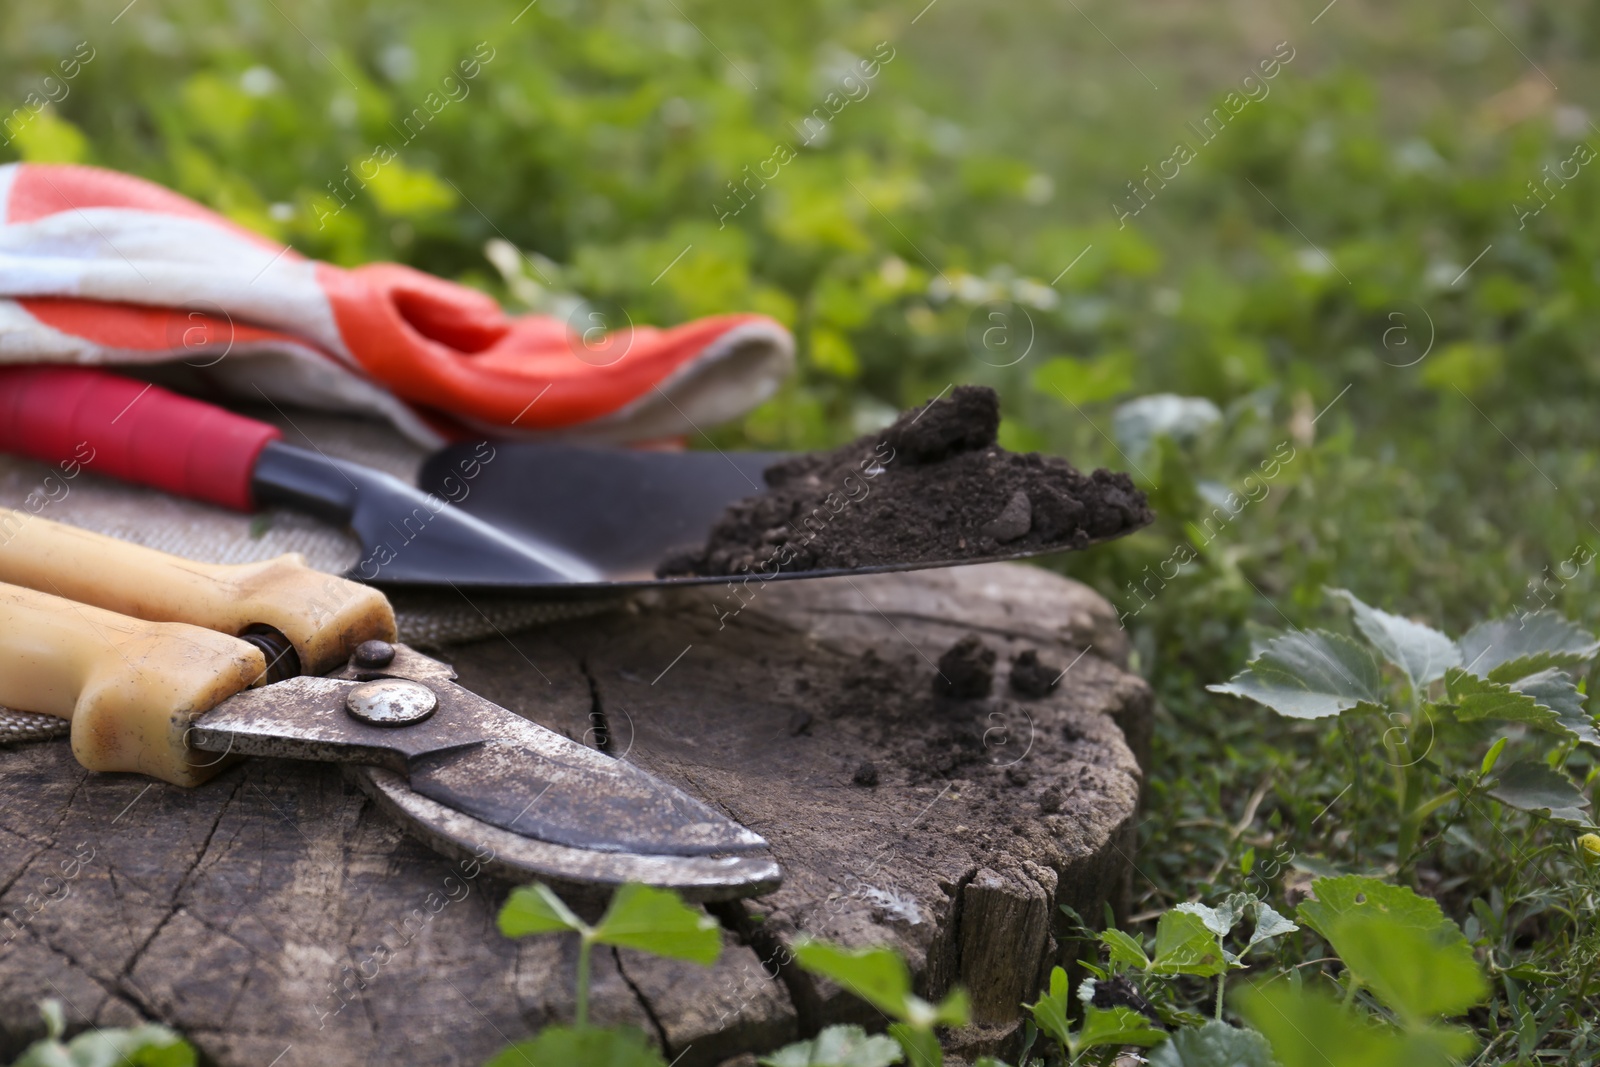 Photo of Old secateurs and other gardening tools on wooden stump among green grass, closeup